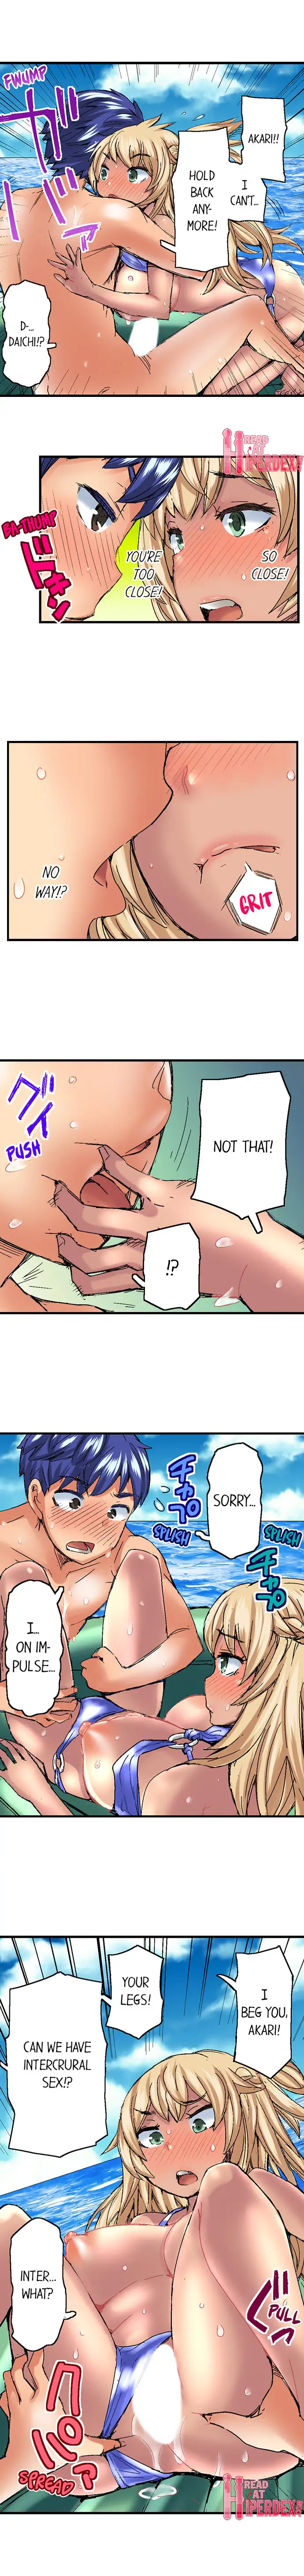 Taking a Hot Tanned Chick’s Virginity - Chapter 9 Page 5